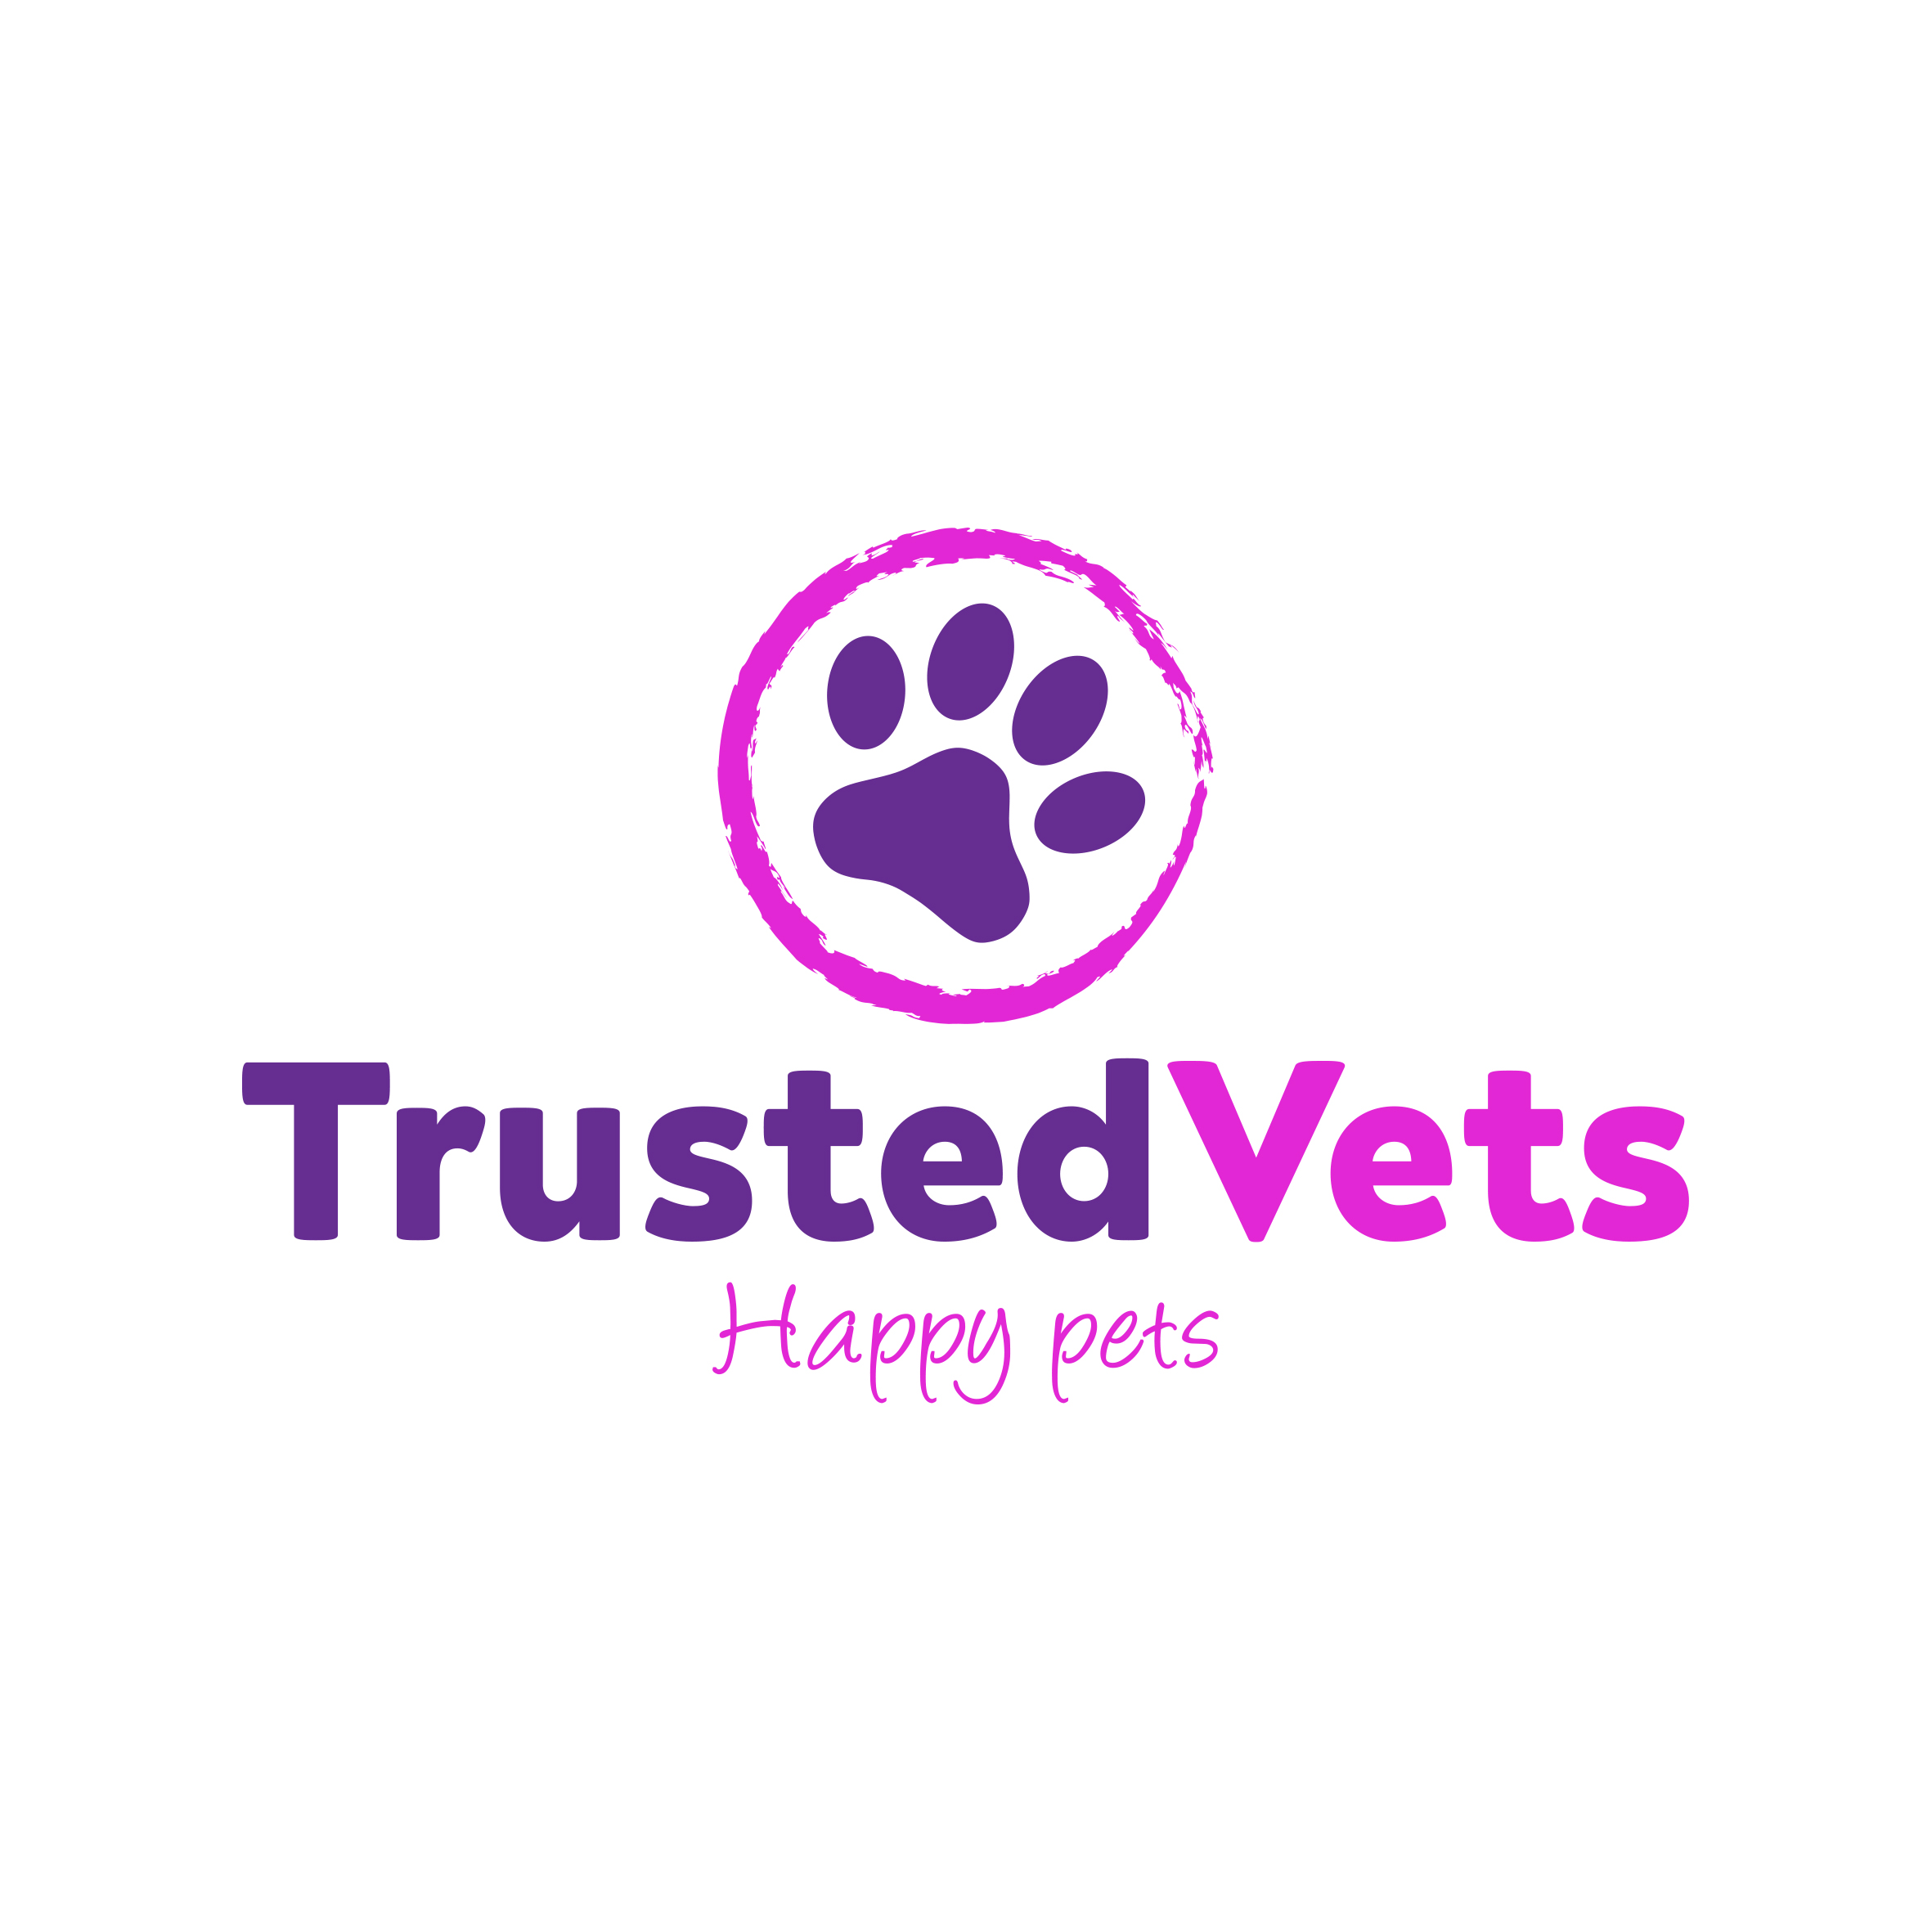 Trusted Vets